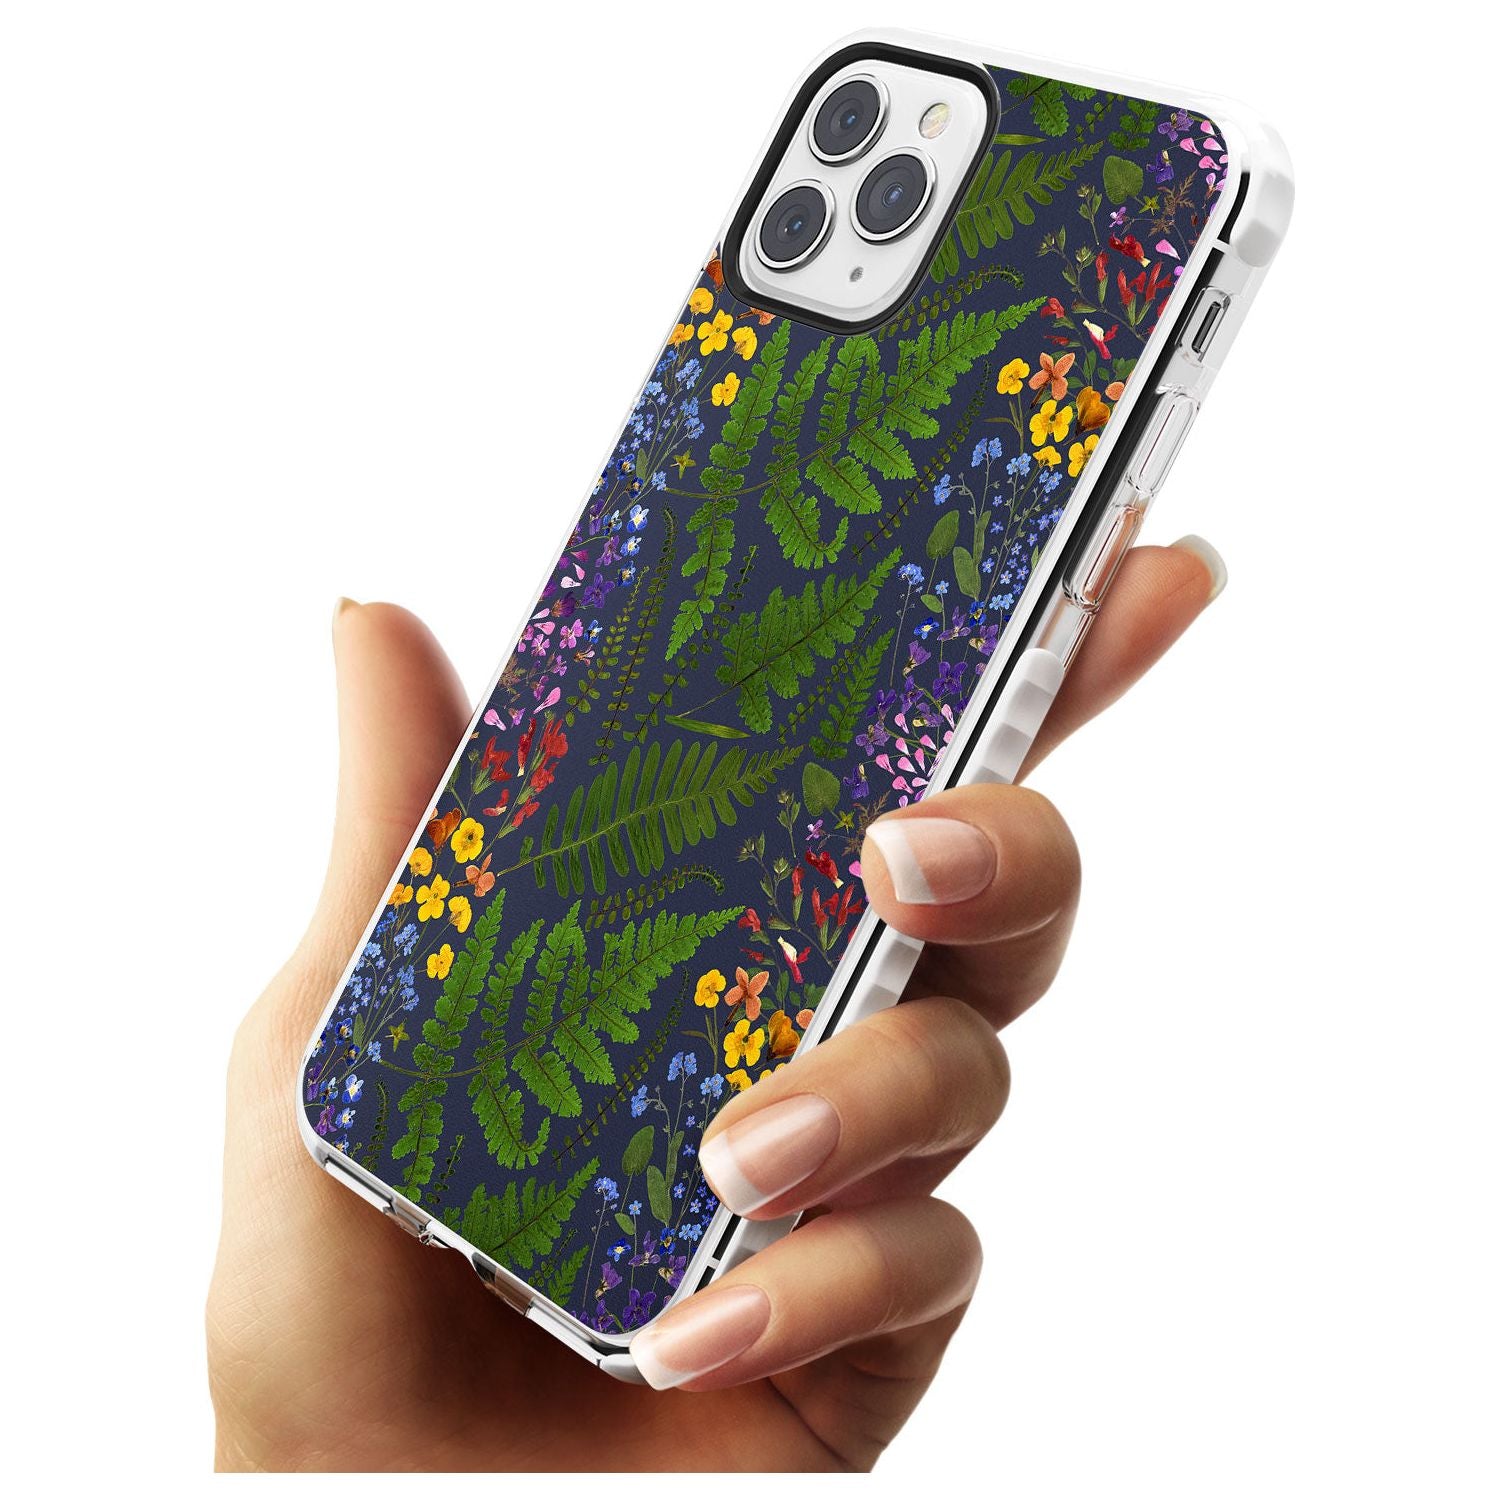 Busy Floral and Fern Design - Navy Impact Phone Case for iPhone 11 Pro Max